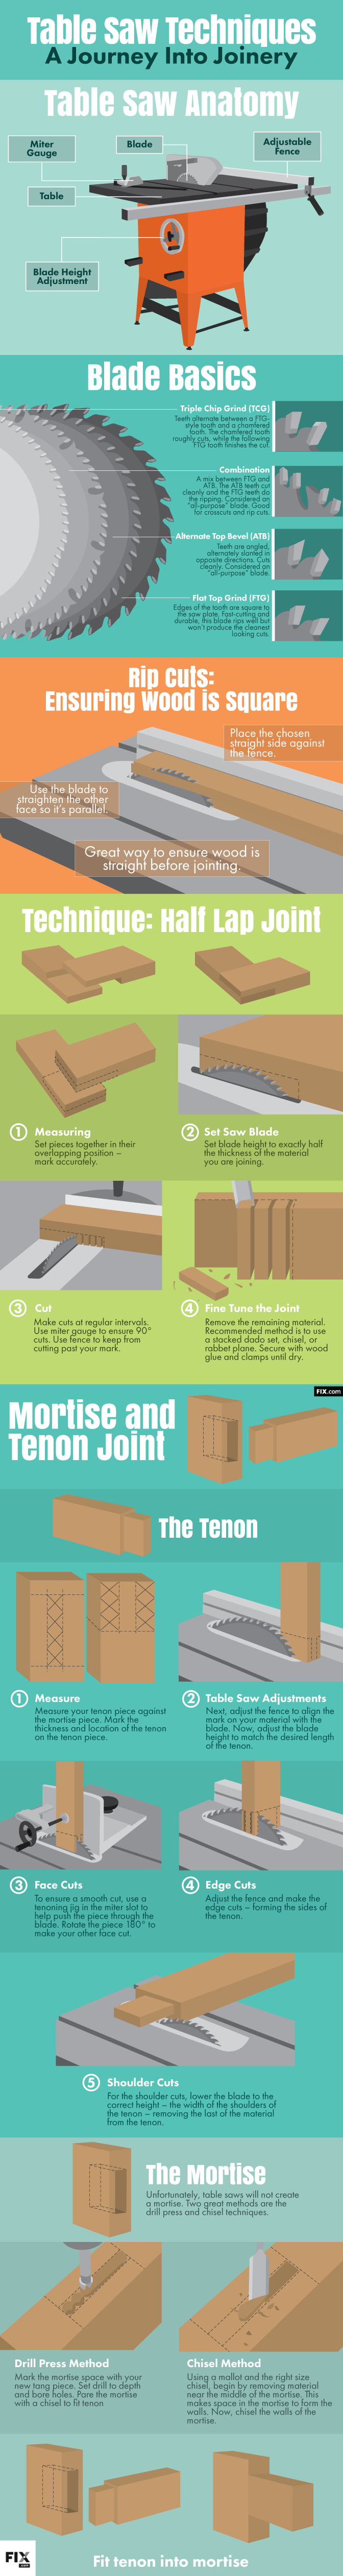 Table Saw Techniques A Journey Into Joinery #infographic